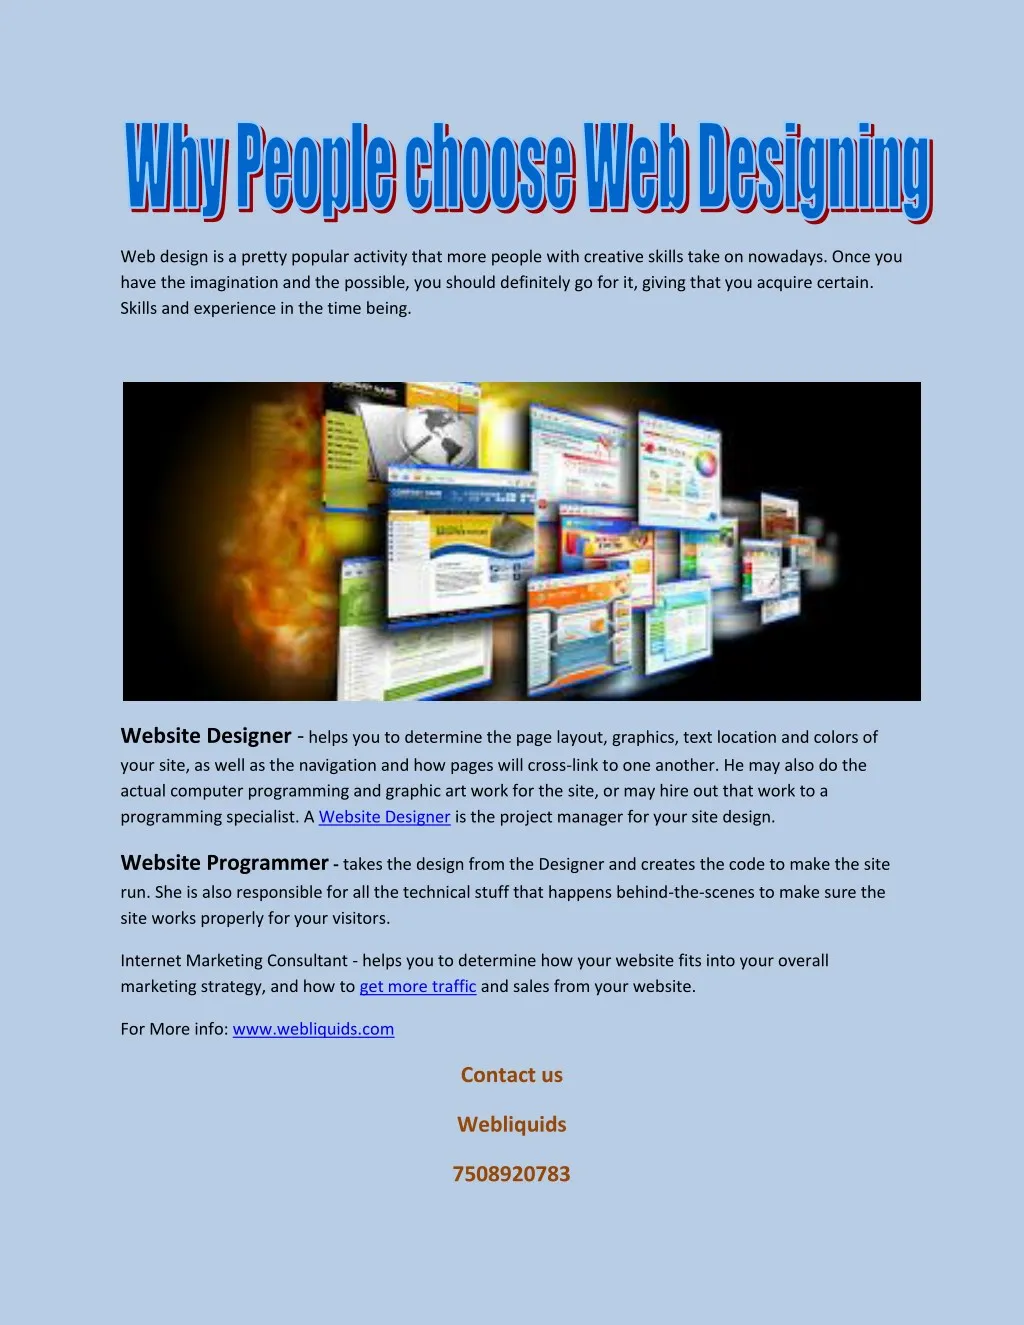 web design is a pretty popular activity that more